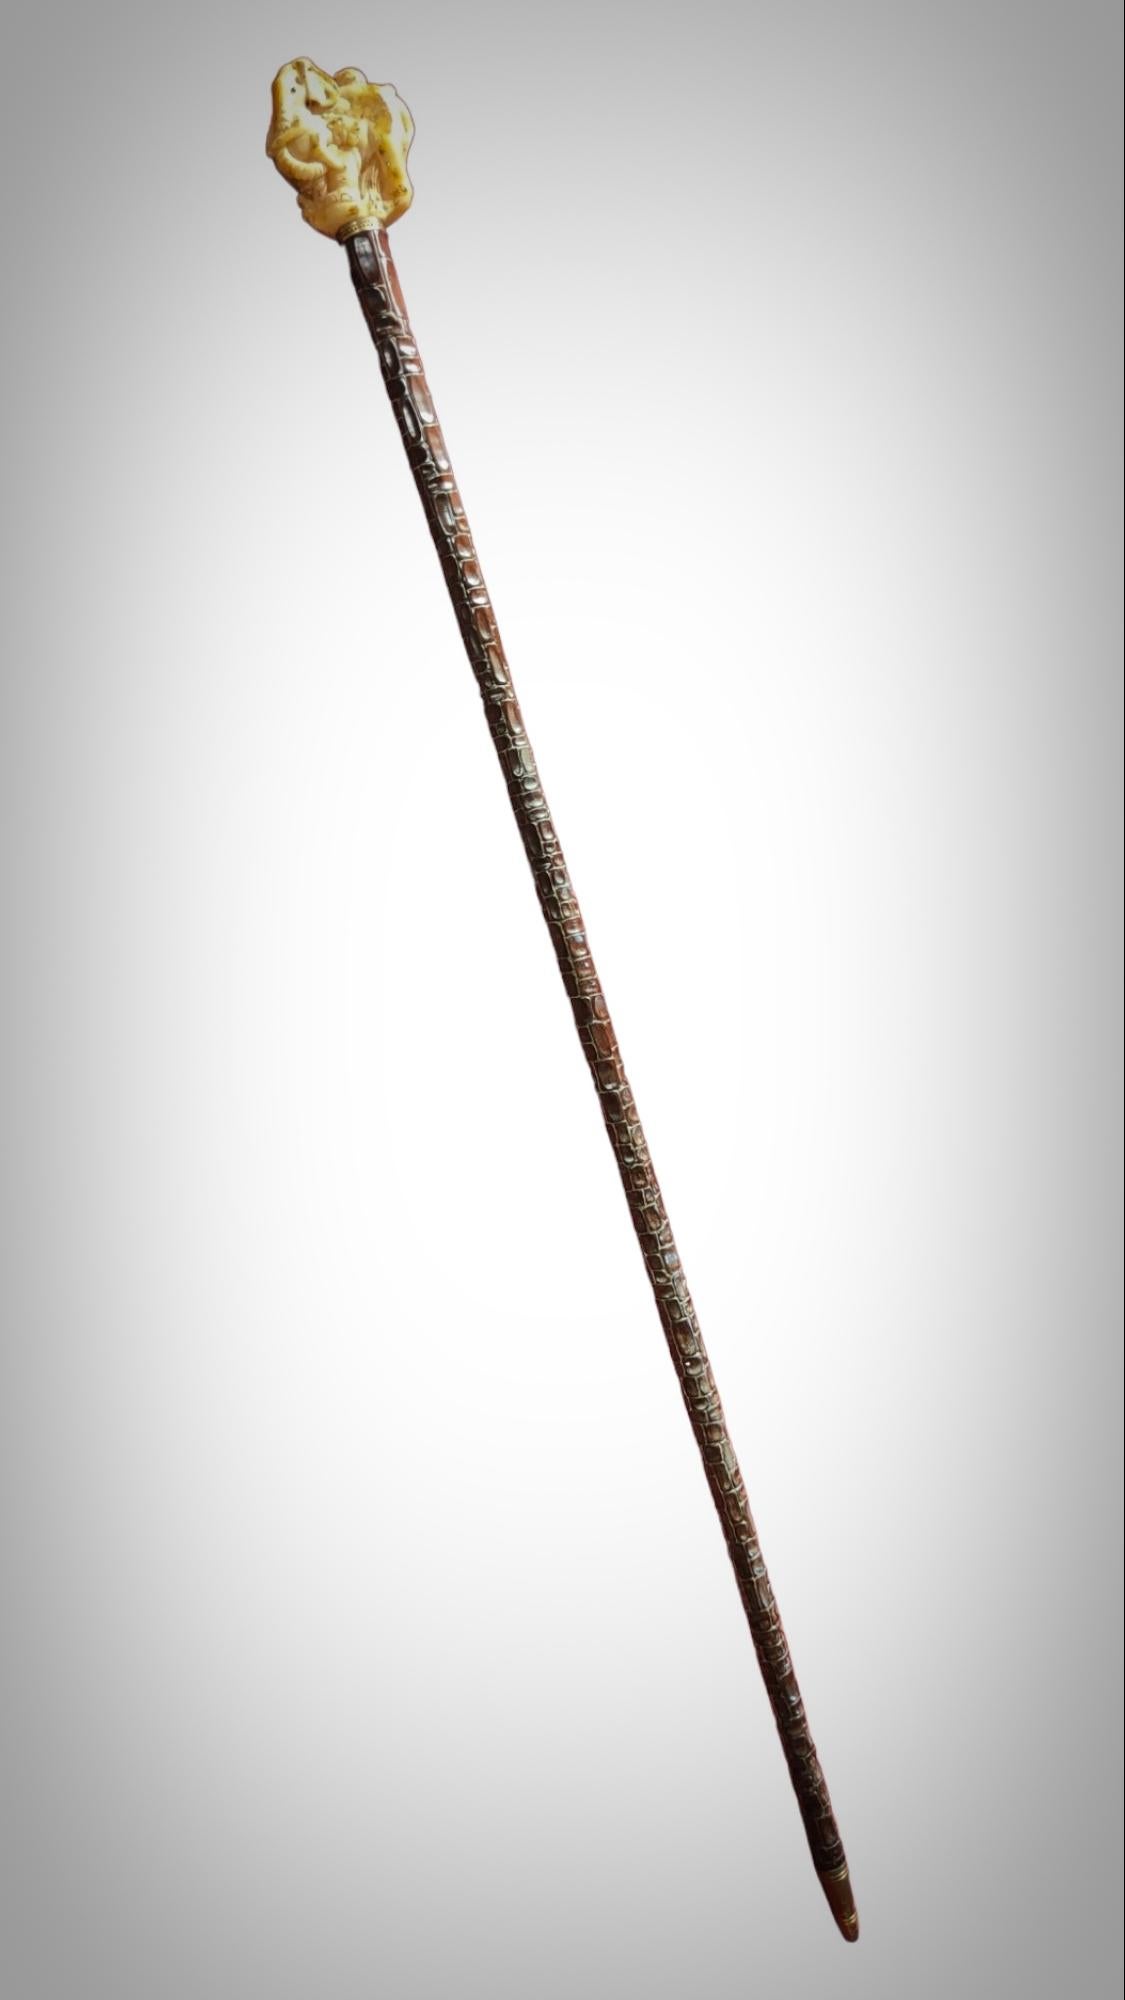 Cane In Baltic Amber XIX Century
ELEGANT GENTLEMEN'S CANE MADE IN AMBRAR AND THE WHIP IN EXOTIC GUAYANA WOOD END OF THE XIX CENTURY EXCELLENT CONDITION MEASURES 92 CM HIGH